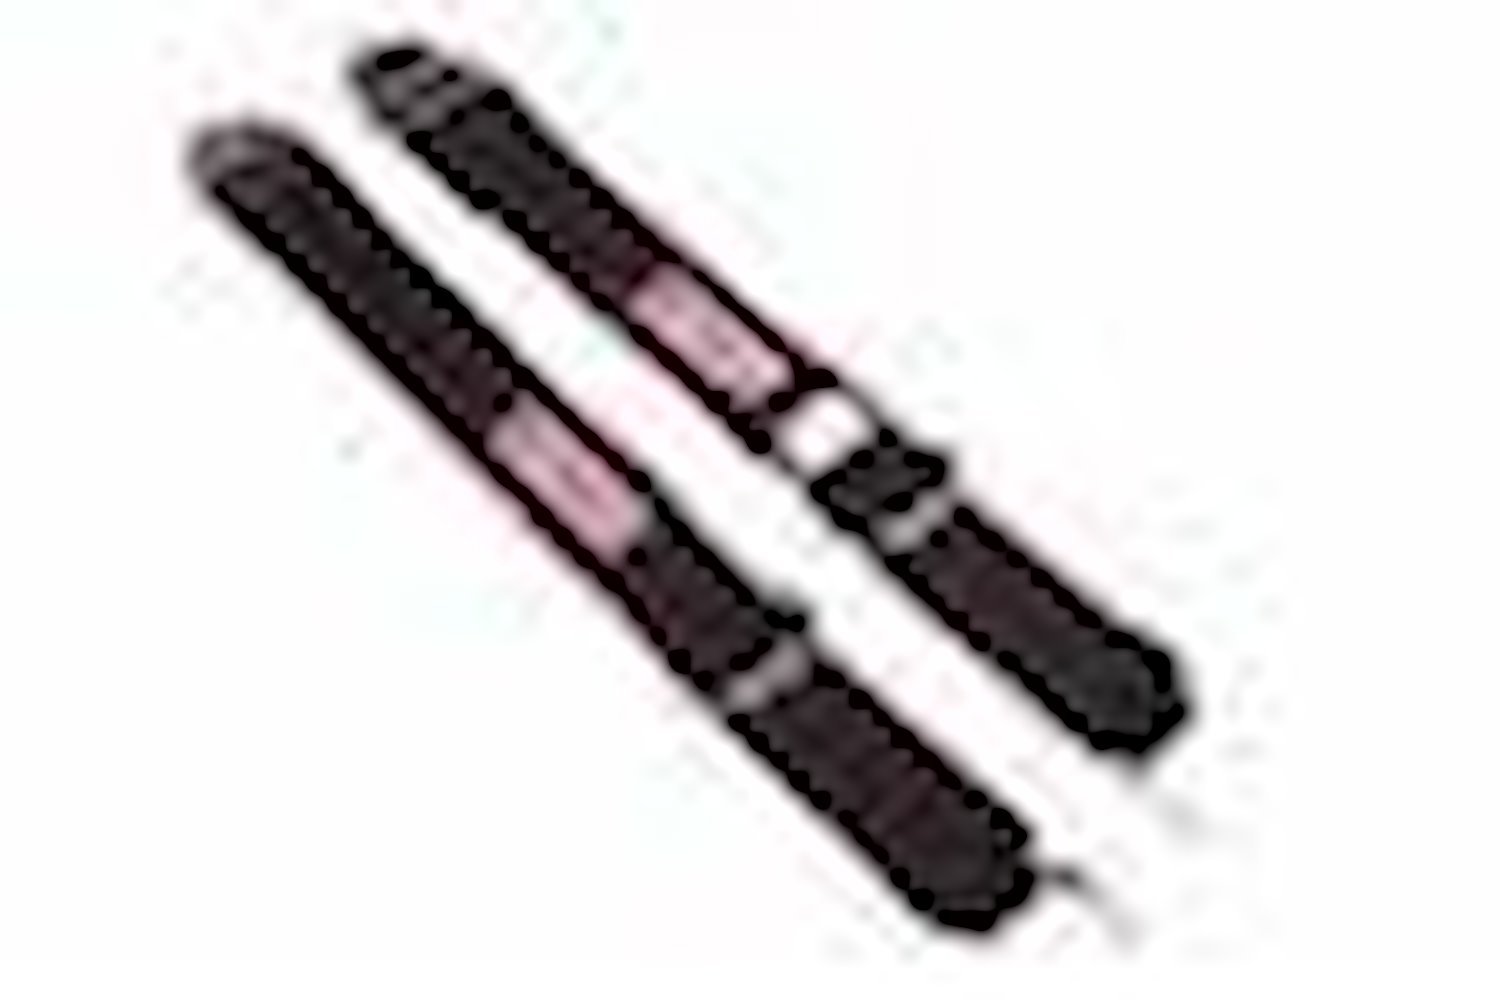 NON-SFI 2 B&T PULL UP Lap Belt w/side adjuster WRAP HOT PINK